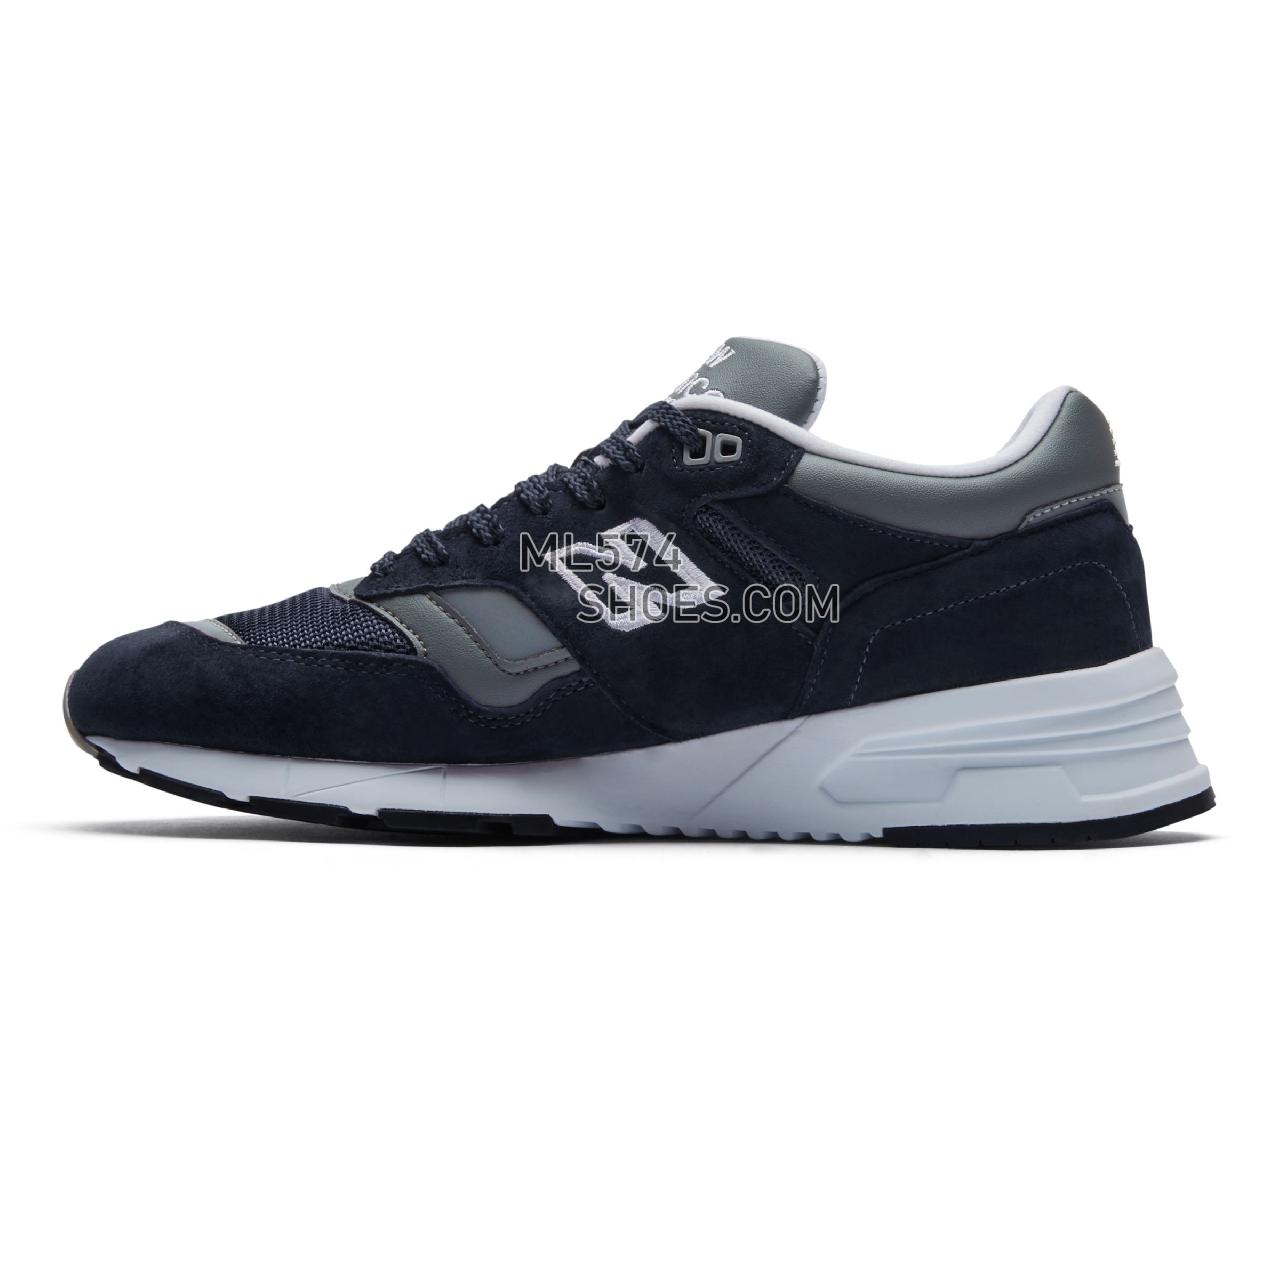 New Balance Made in UK 1530 - Men's Made in UK 1530 - Navy with Grey and White - M1530NVY